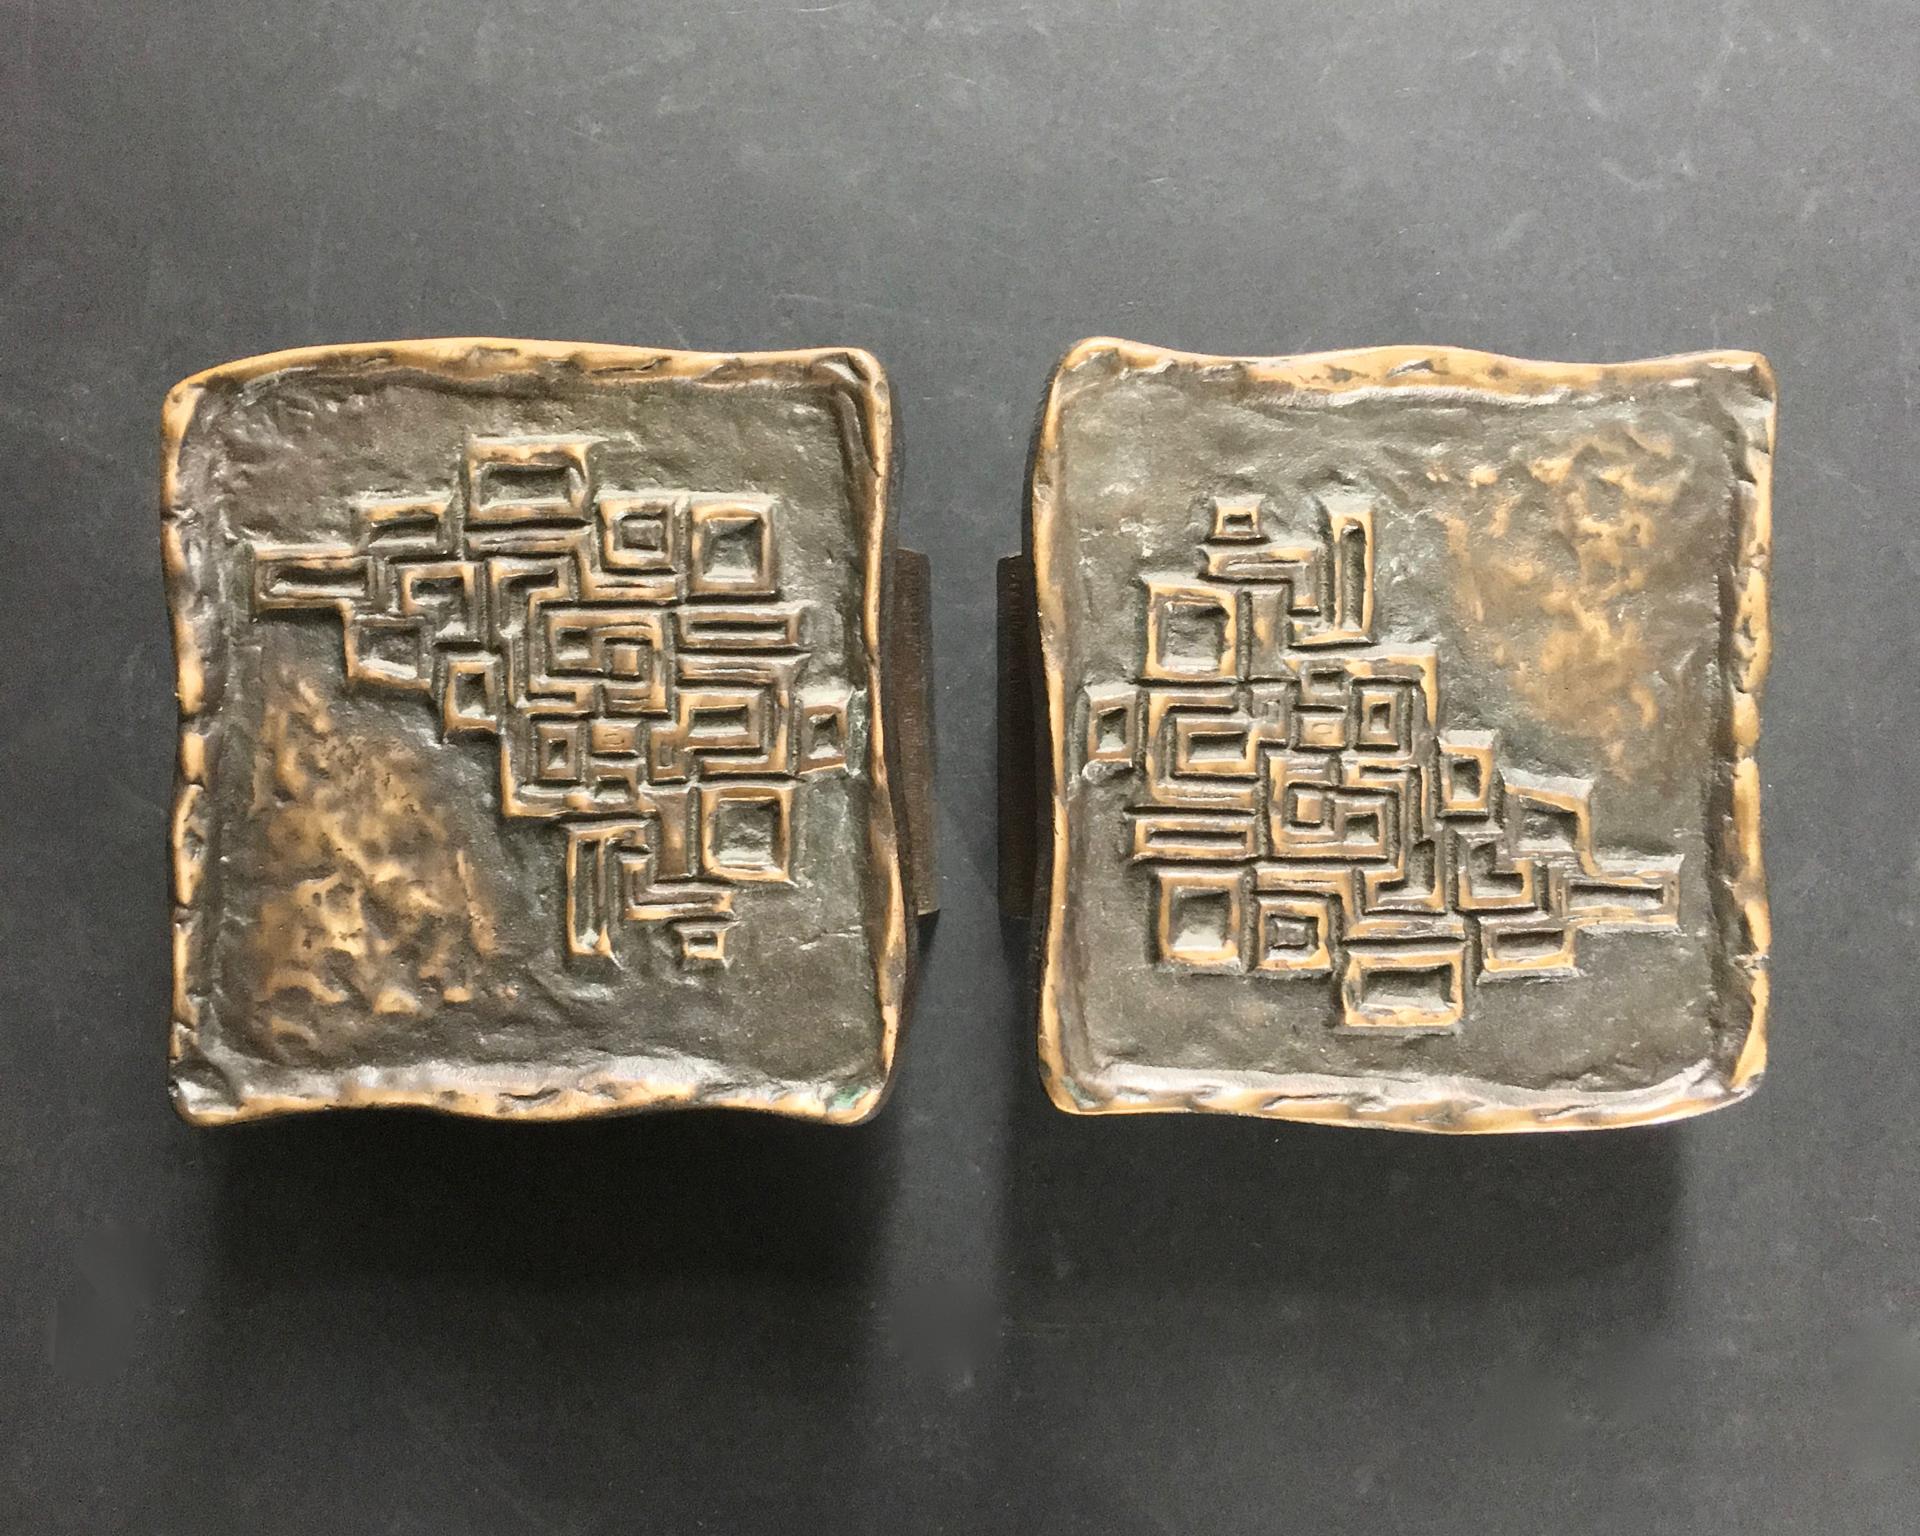 Set of two large bronze door handles of rectangular form with raised abstract design. European, probably 1970s.

These are heavy pieces, made of cast bronze with deep reddish-brown tones, which could suit both interior and exterior doors. The two